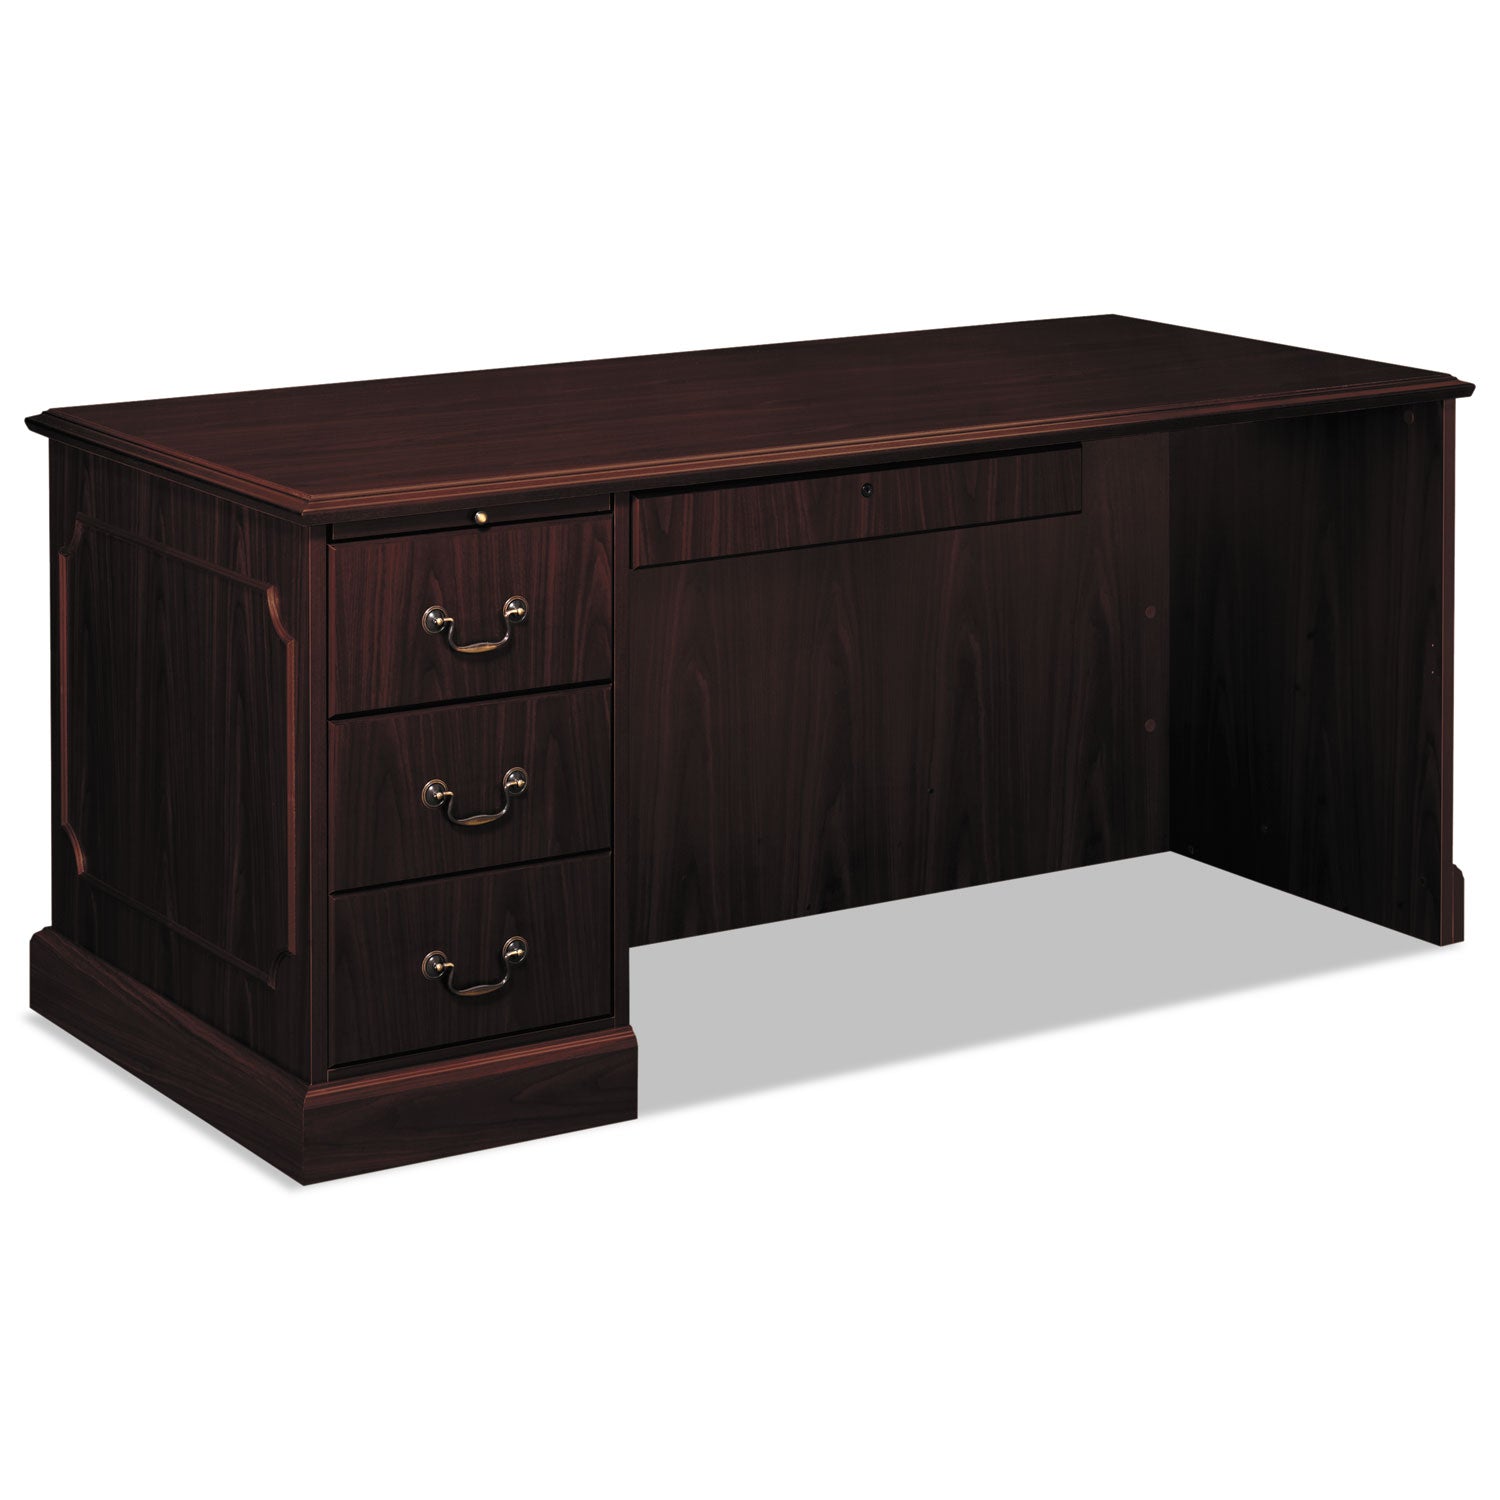 94000 Series "L" Workstation Desk for Return on Right, 66" x 30" x 29.5", Mahogany - 